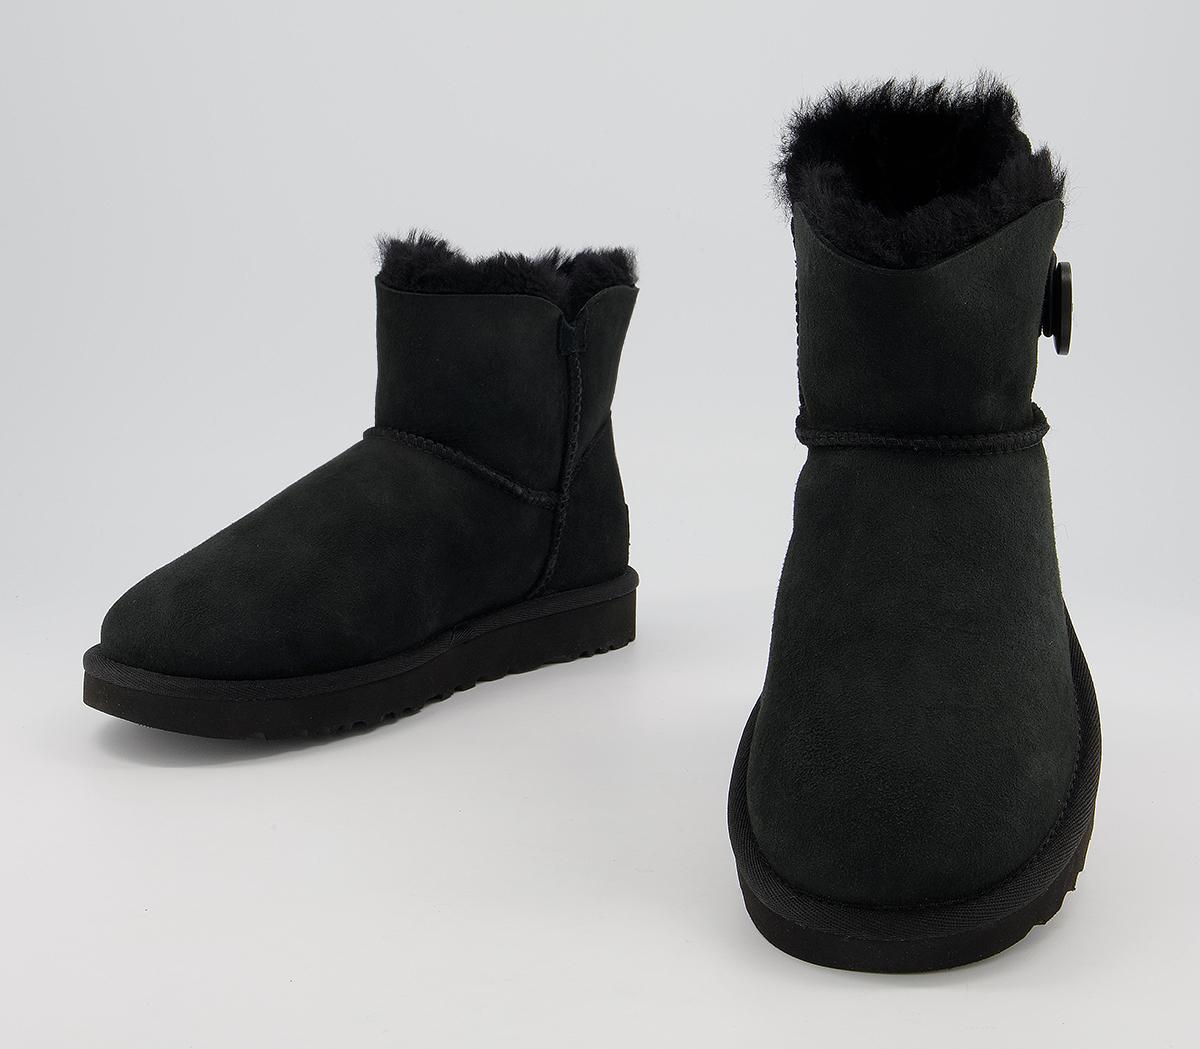 UGG Mini Bailey Button II Black Suede - Women's Ankle Boots